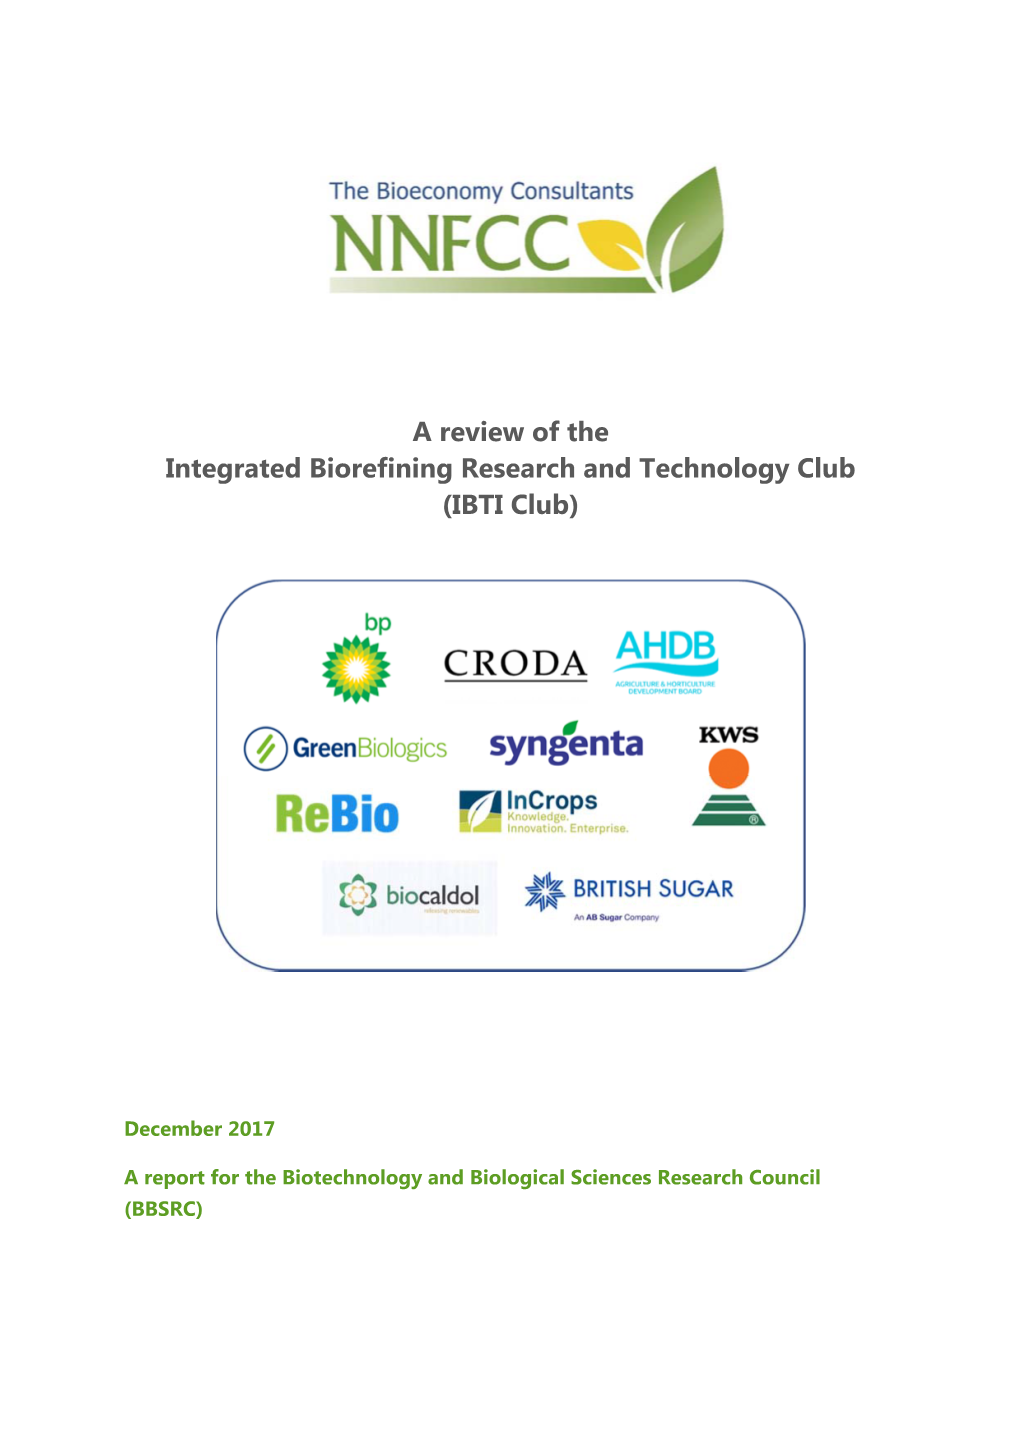 A Review of the Integrated Biorefining Research and Technology Club (IBTI Club)